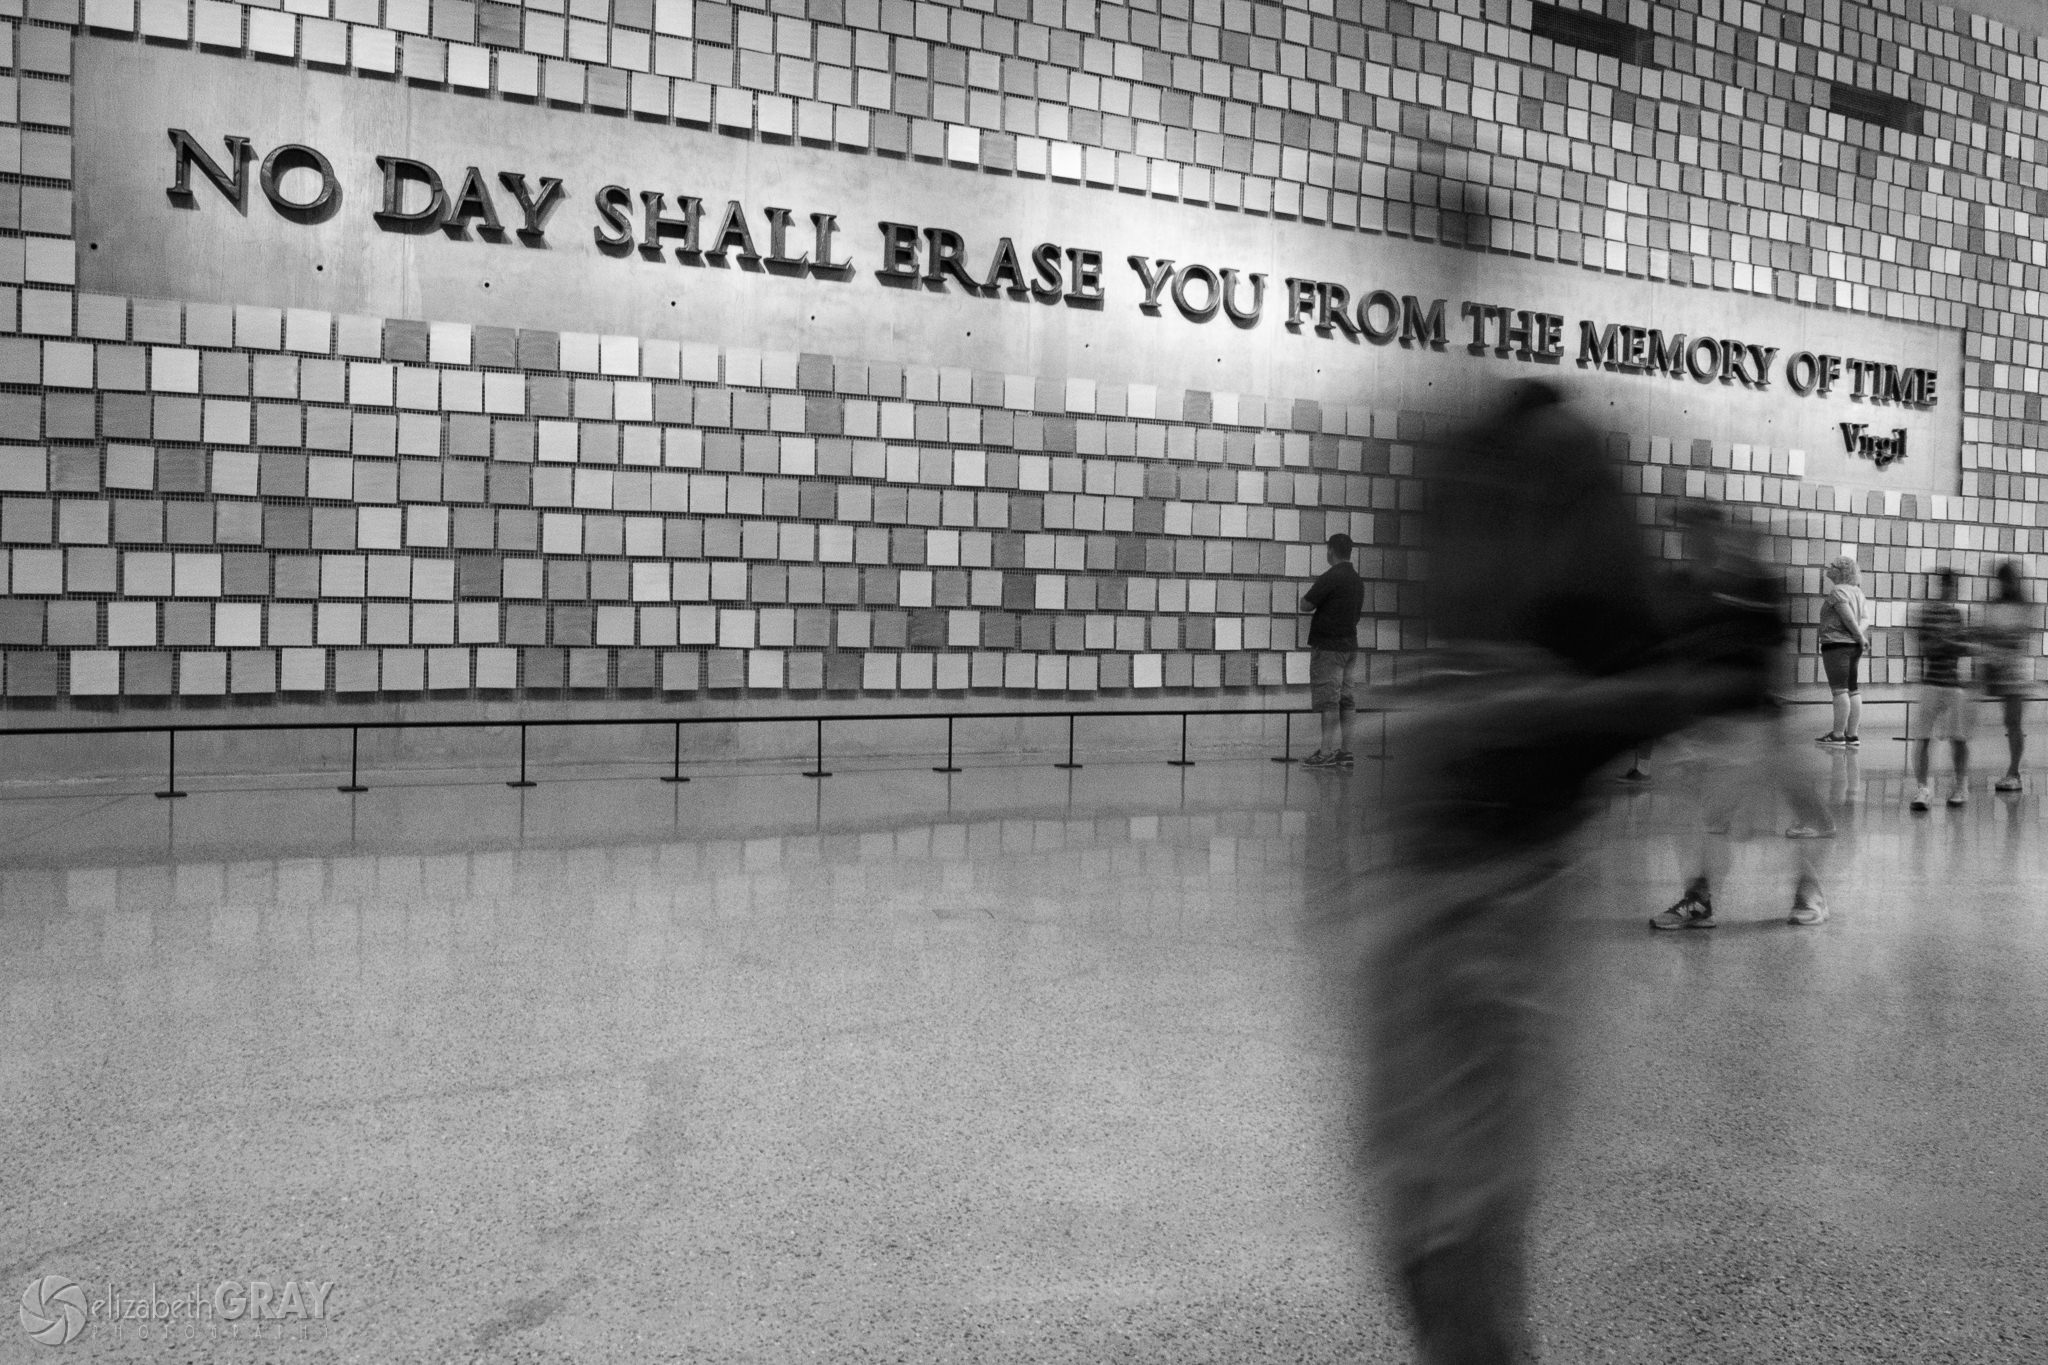 No Day Shall Erase You From the Memory of Time